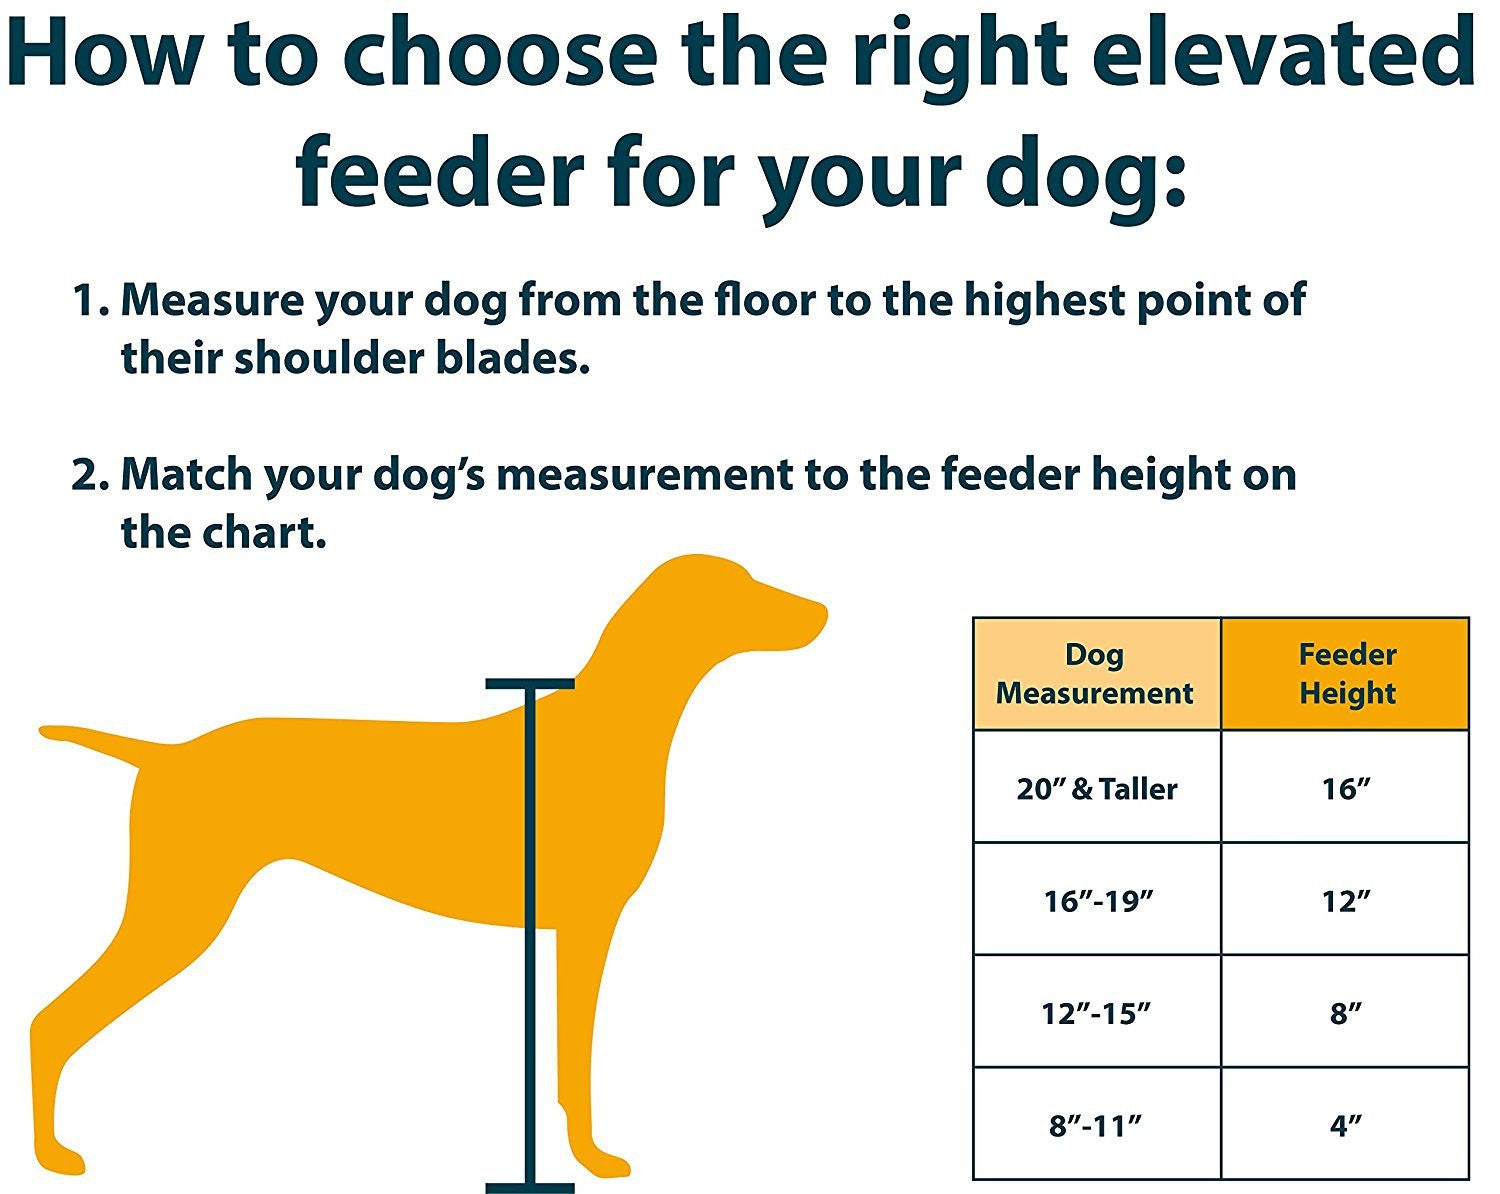 Feeder height guide